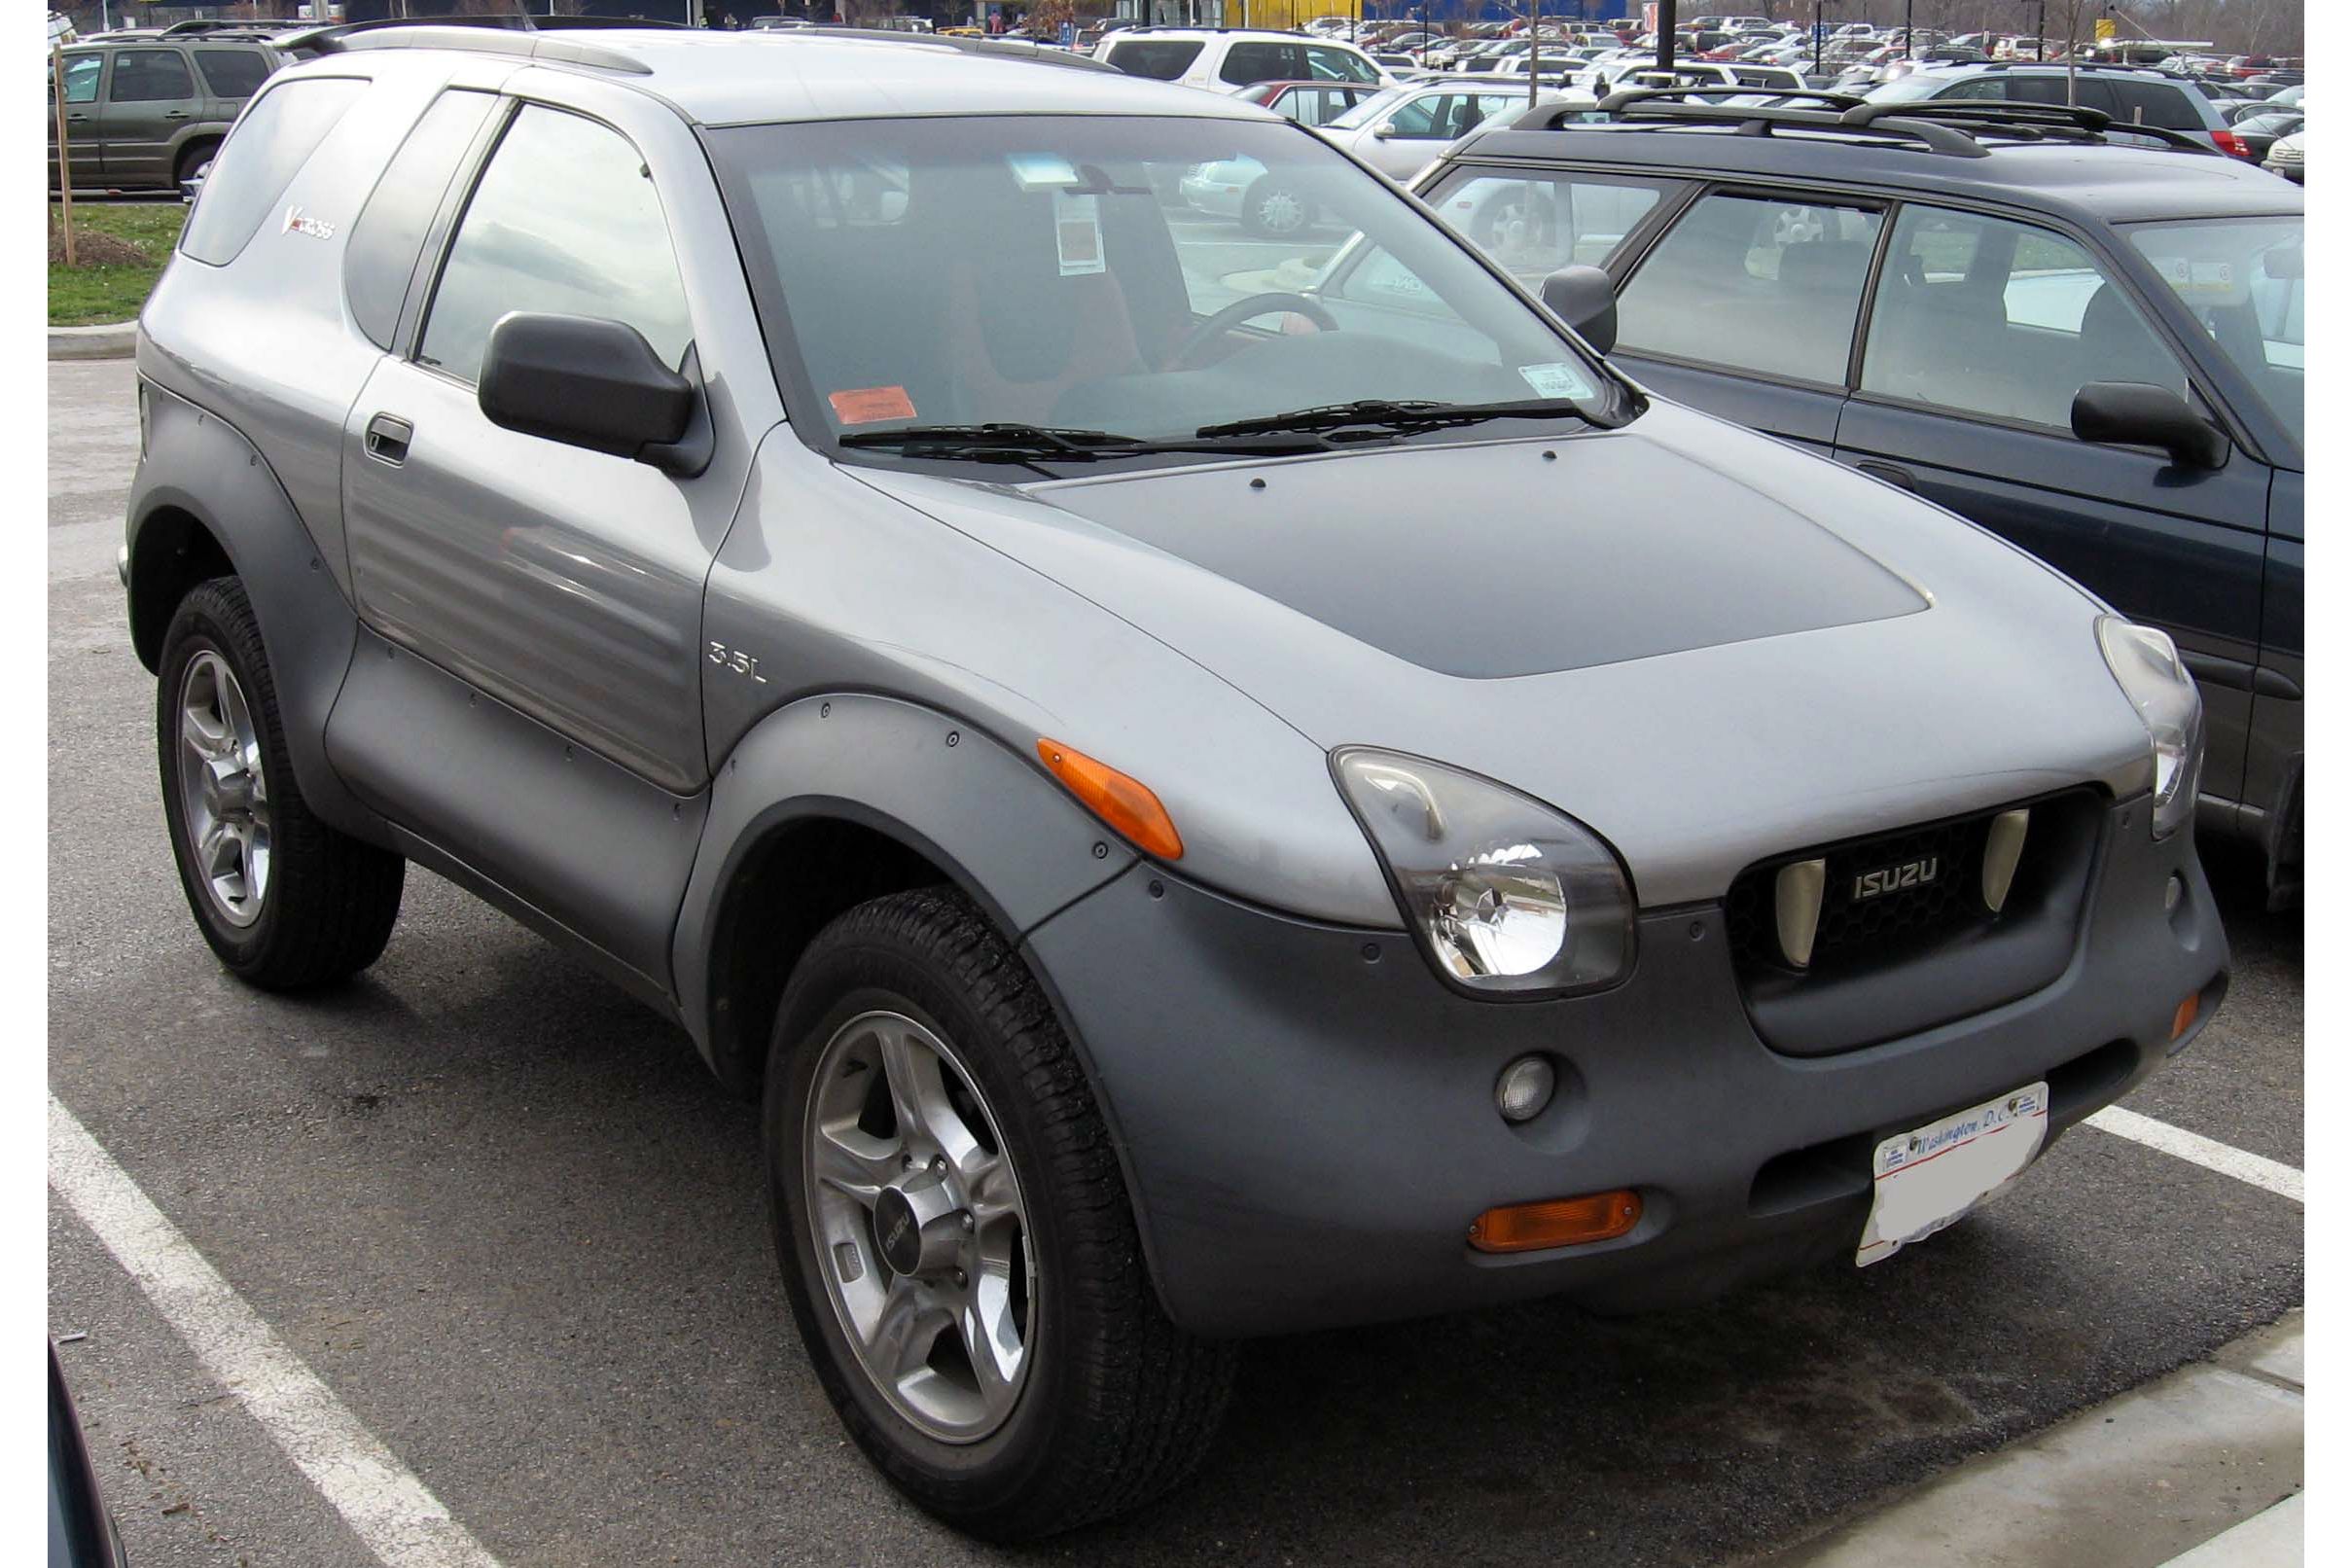 <p>About a decade before it decided to leave the U.S. market, Isuzu tried to <a href="https://blog.cheapism.com/best-suvs/">give buyers an SUV</a> that looked distinctive, fun, and a touch futuristic. So it produced the VehiCross, a limited-edition vehicle that inspired both cheers and jeers. While it snagged a <a href="https://www.motortrend.com/news/isuzu-vehicross/">decent enough review</a> from Motor Trend (though they do call the VehiCross "a Toyota RAV4 on high-potency steroids," others pulled few punches. "No one wants a three-door SUV that looks like an <a href="https://www.caranddriver.com/features/concepts-we-wish-were-never-built-feature">escapee from the set of 'Battlestar Galactica,'</a> " deadpans Car and Driver.</p>